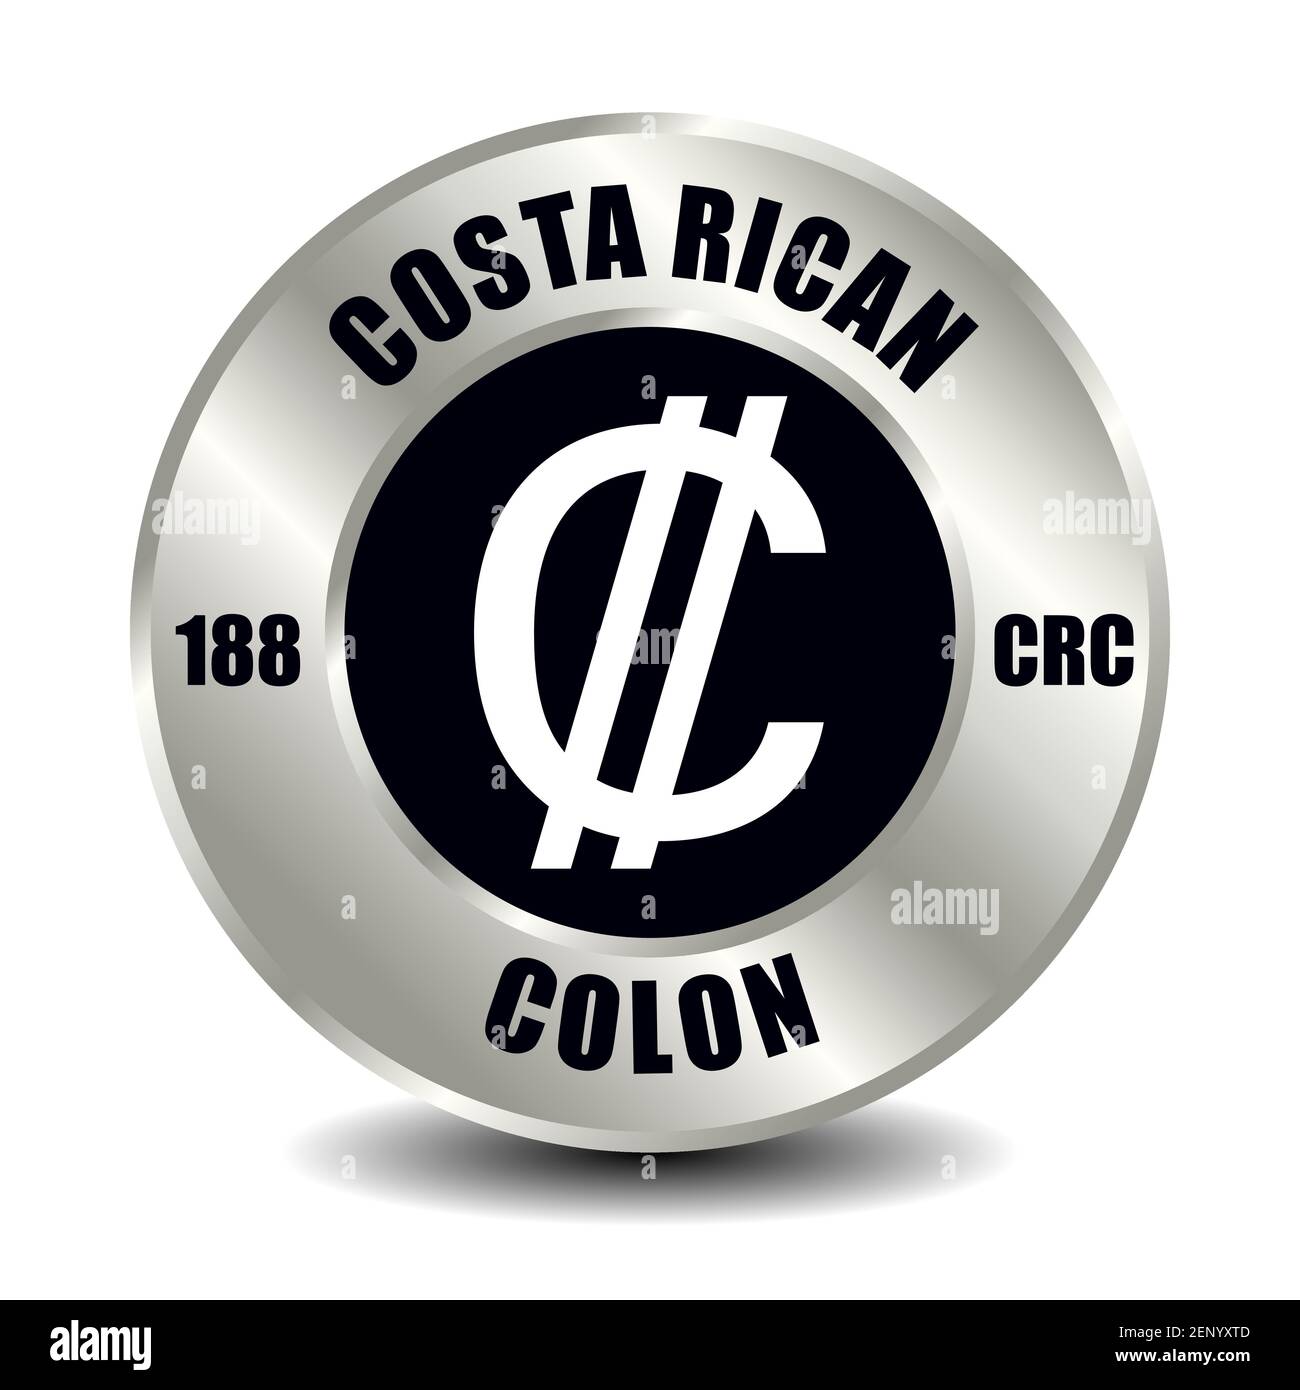 Costa Rica money icon isolated on round silver coin. Vector sign of currency symbol with international ISO code and abbreviation Stock Vector